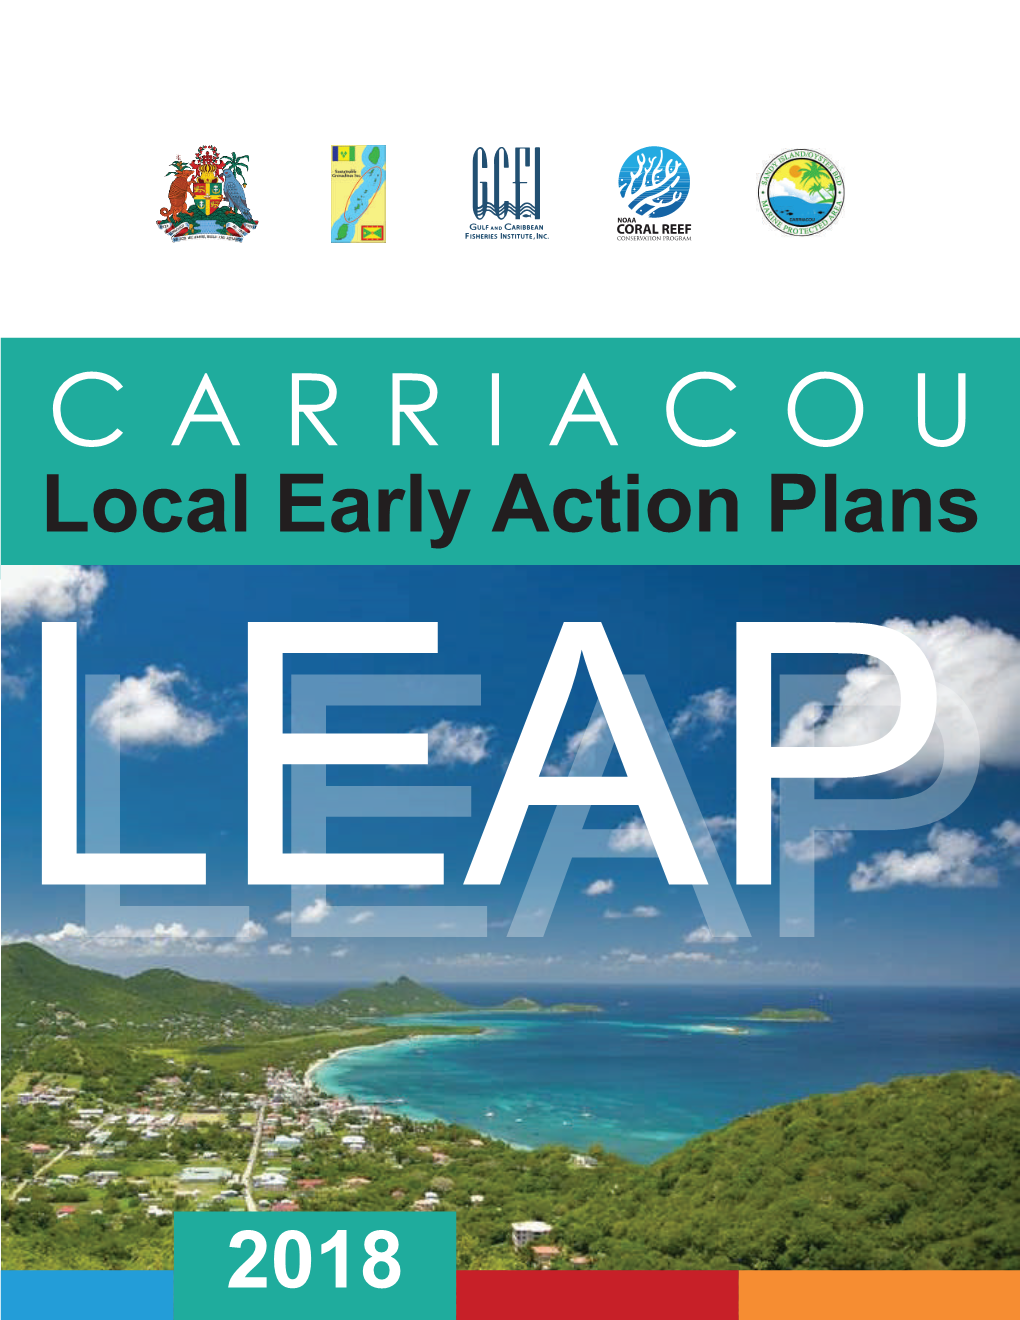 Carriacou Local Early Actions Plans 2018